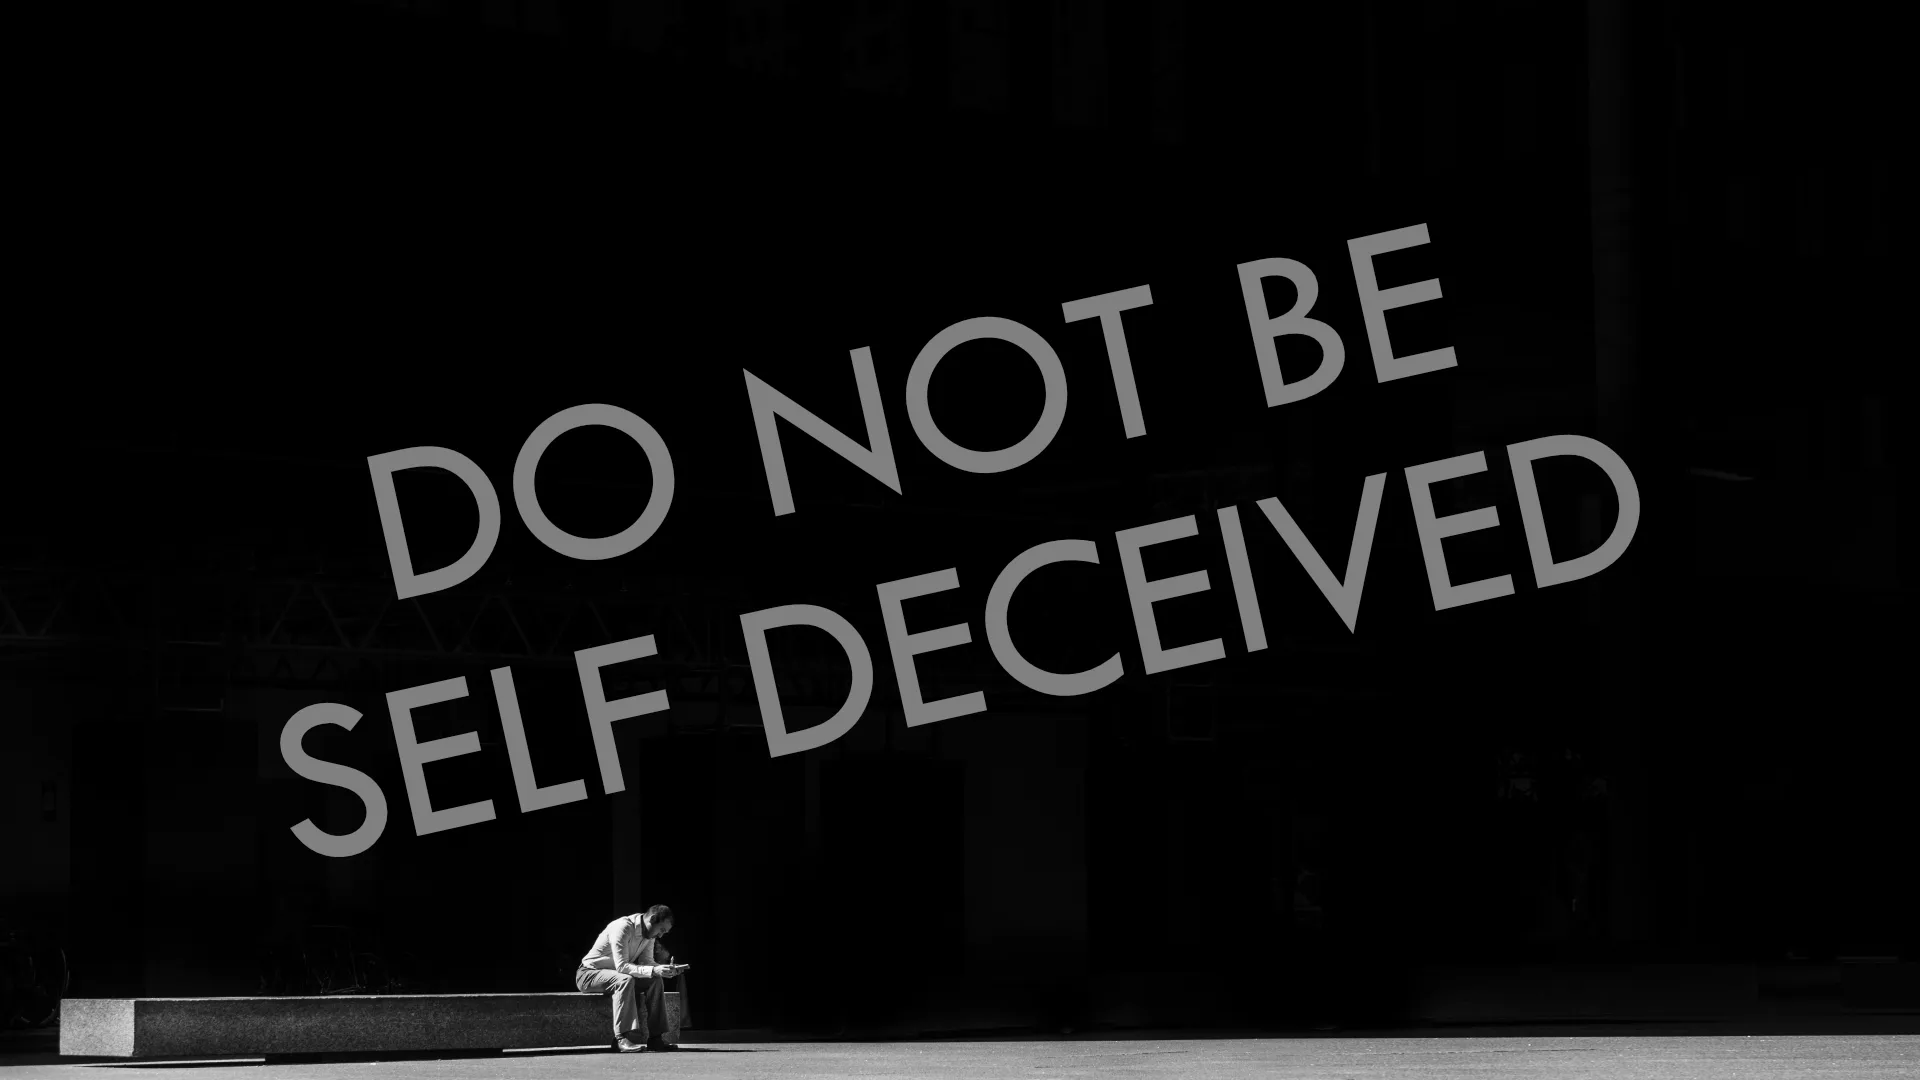 Do not be self-deceived